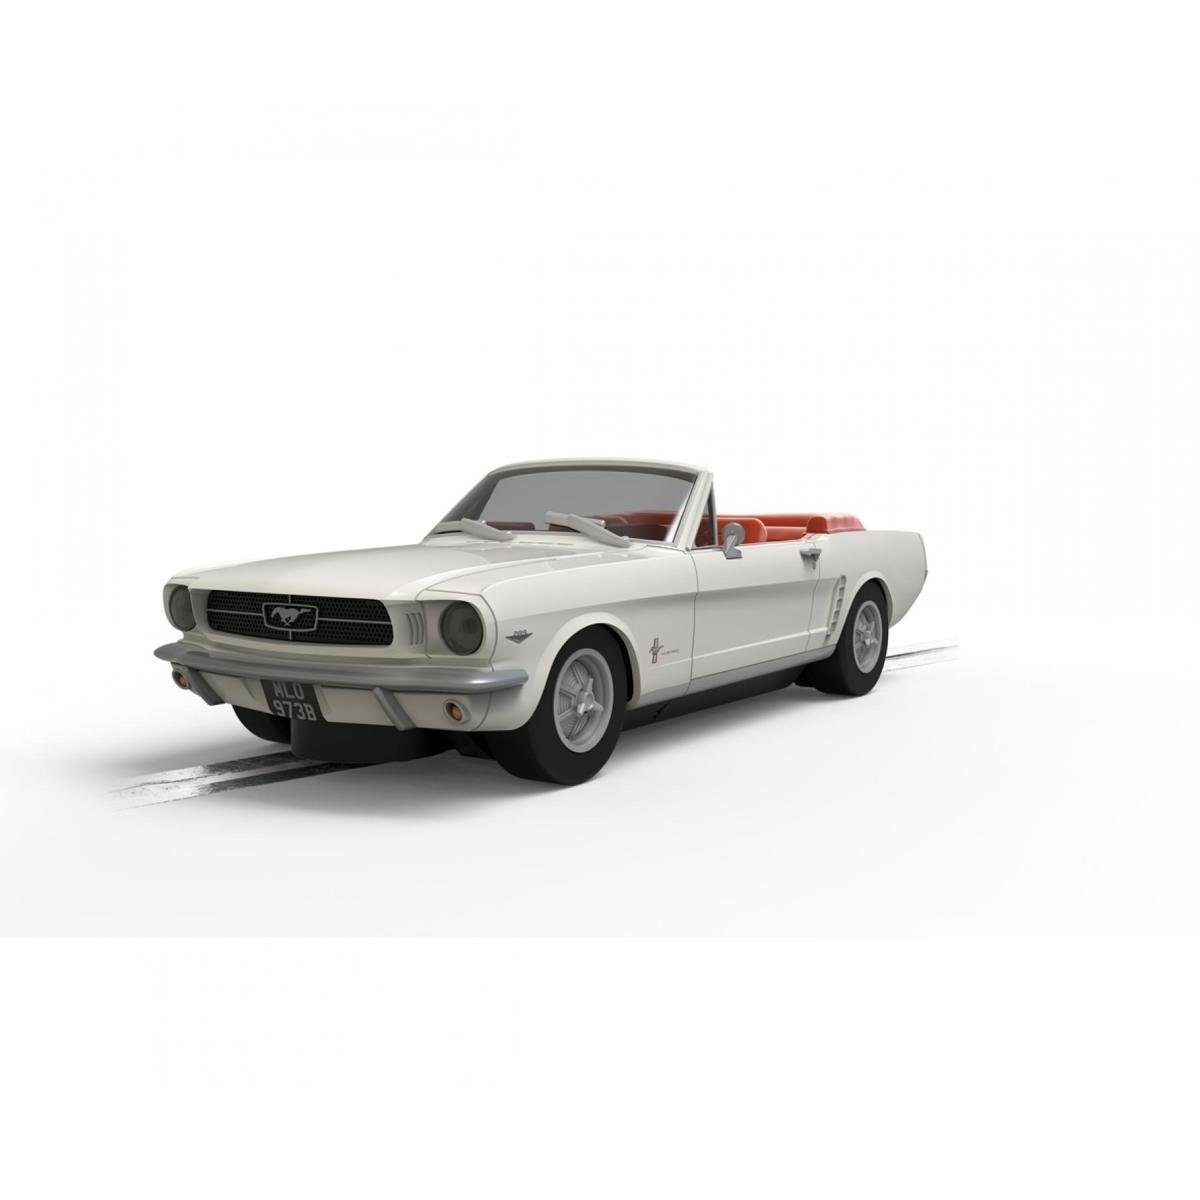 Scalextric Modellauto 560004404 - Modellbausatz,1:32 Ford Mustang JB Goldfinger HD